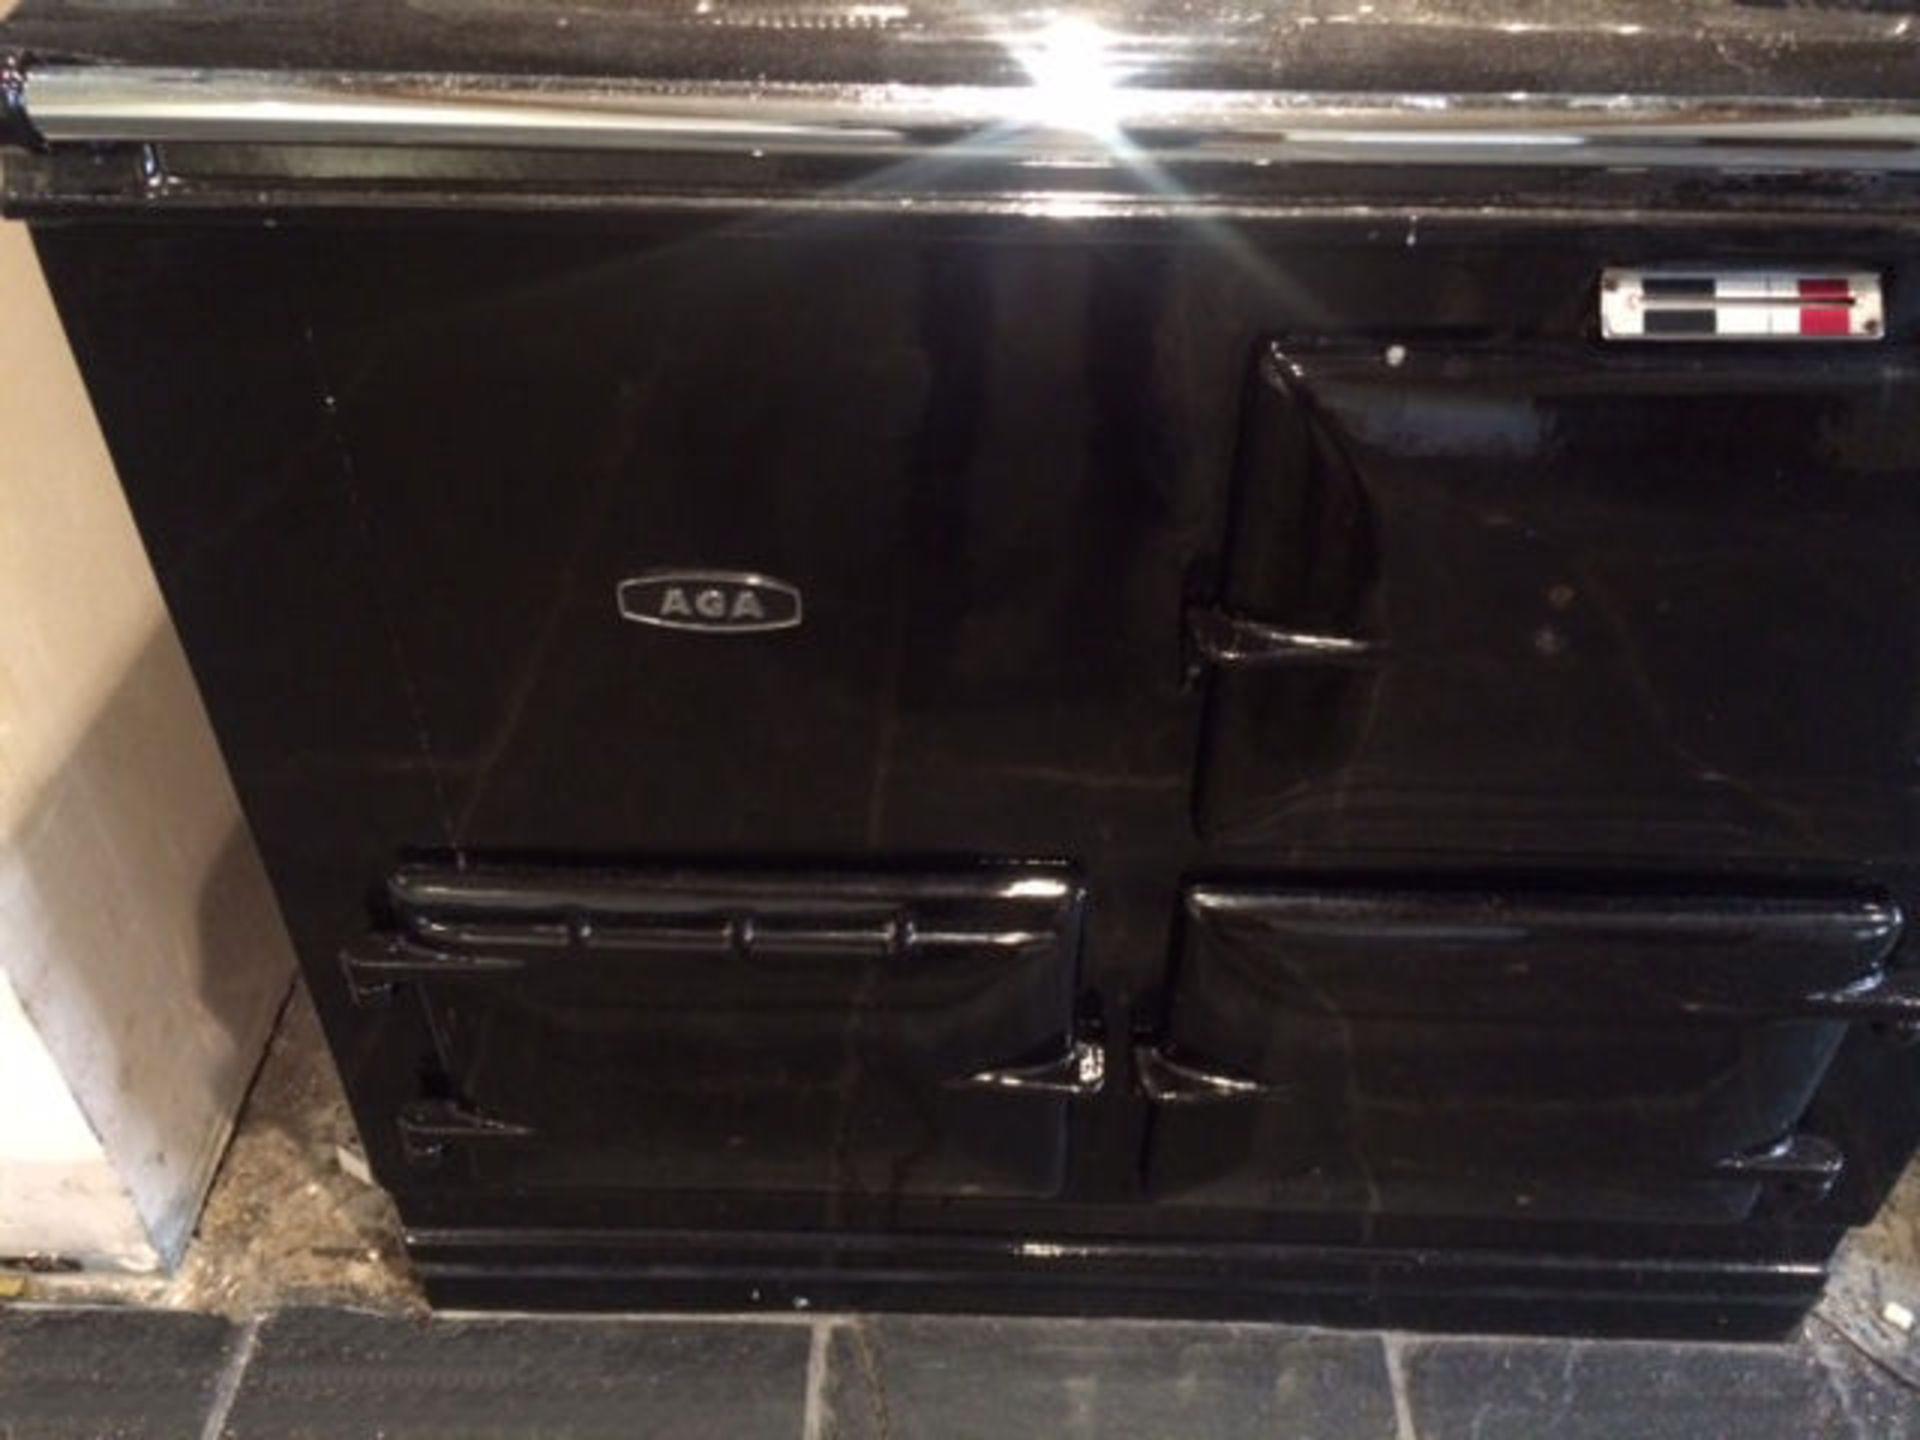 1 x Aga 2-Oven Gas Range Cooker - Cast Iron With Black Enamel Finish - Preowned - NO VAT - Image 3 of 10